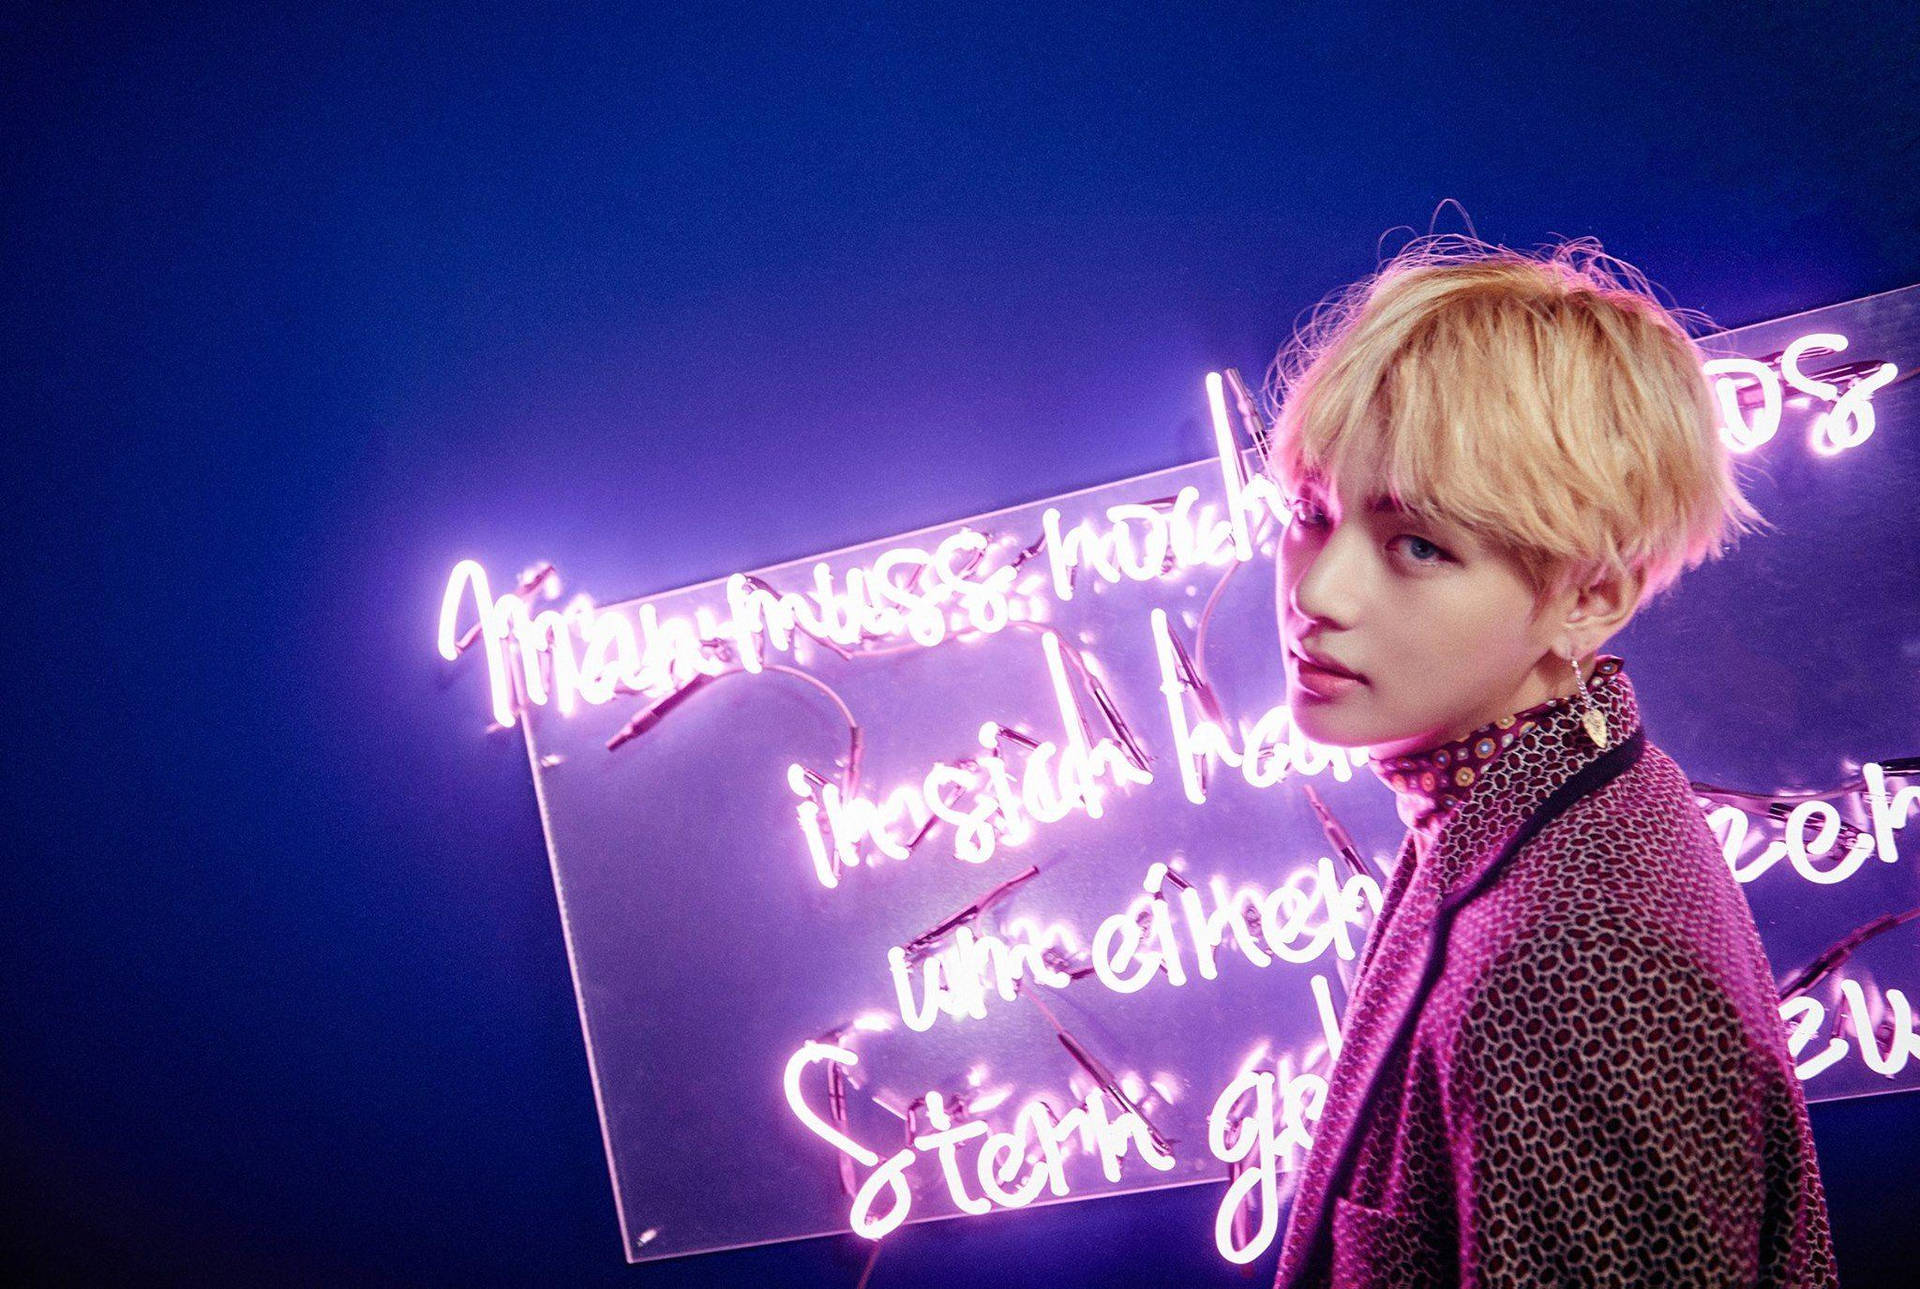 Taehyung Cute With Neon Lights Background